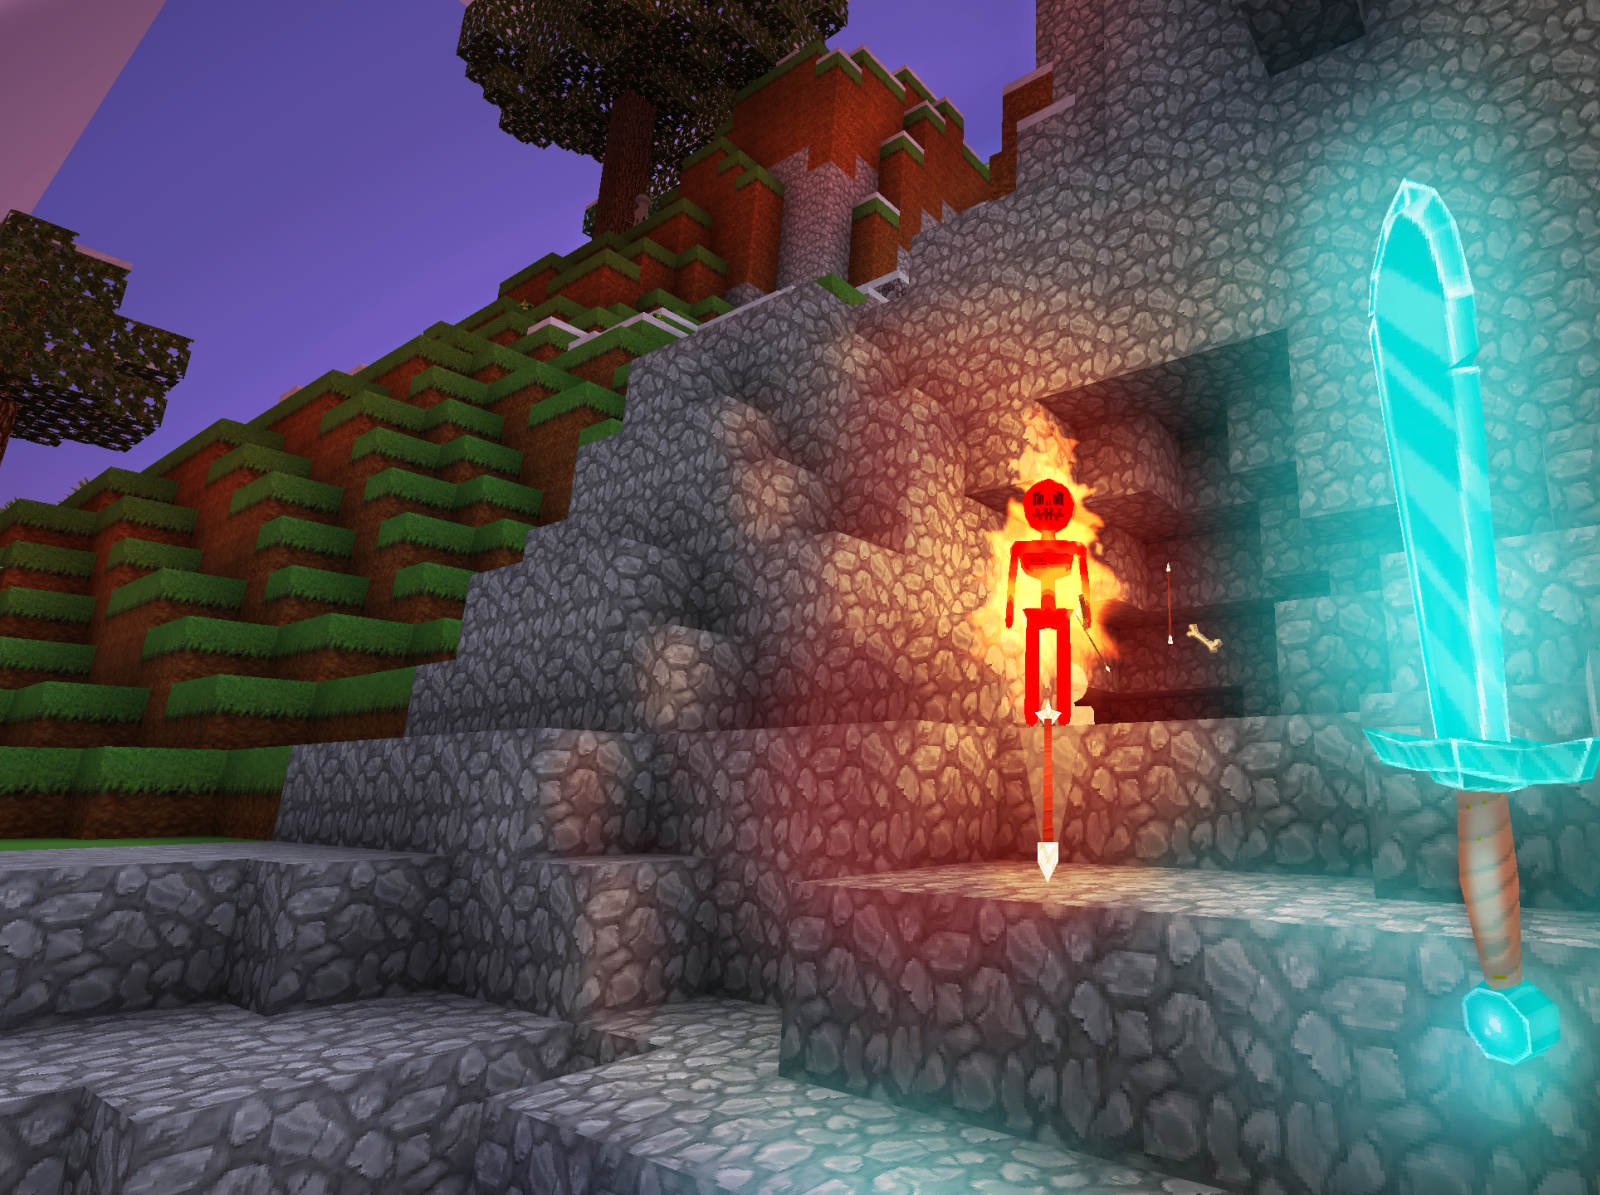 Skeleton On Fire Diamond Sword In Realmcraft Free Minecraft By Tellurion Mobile On Dribbble